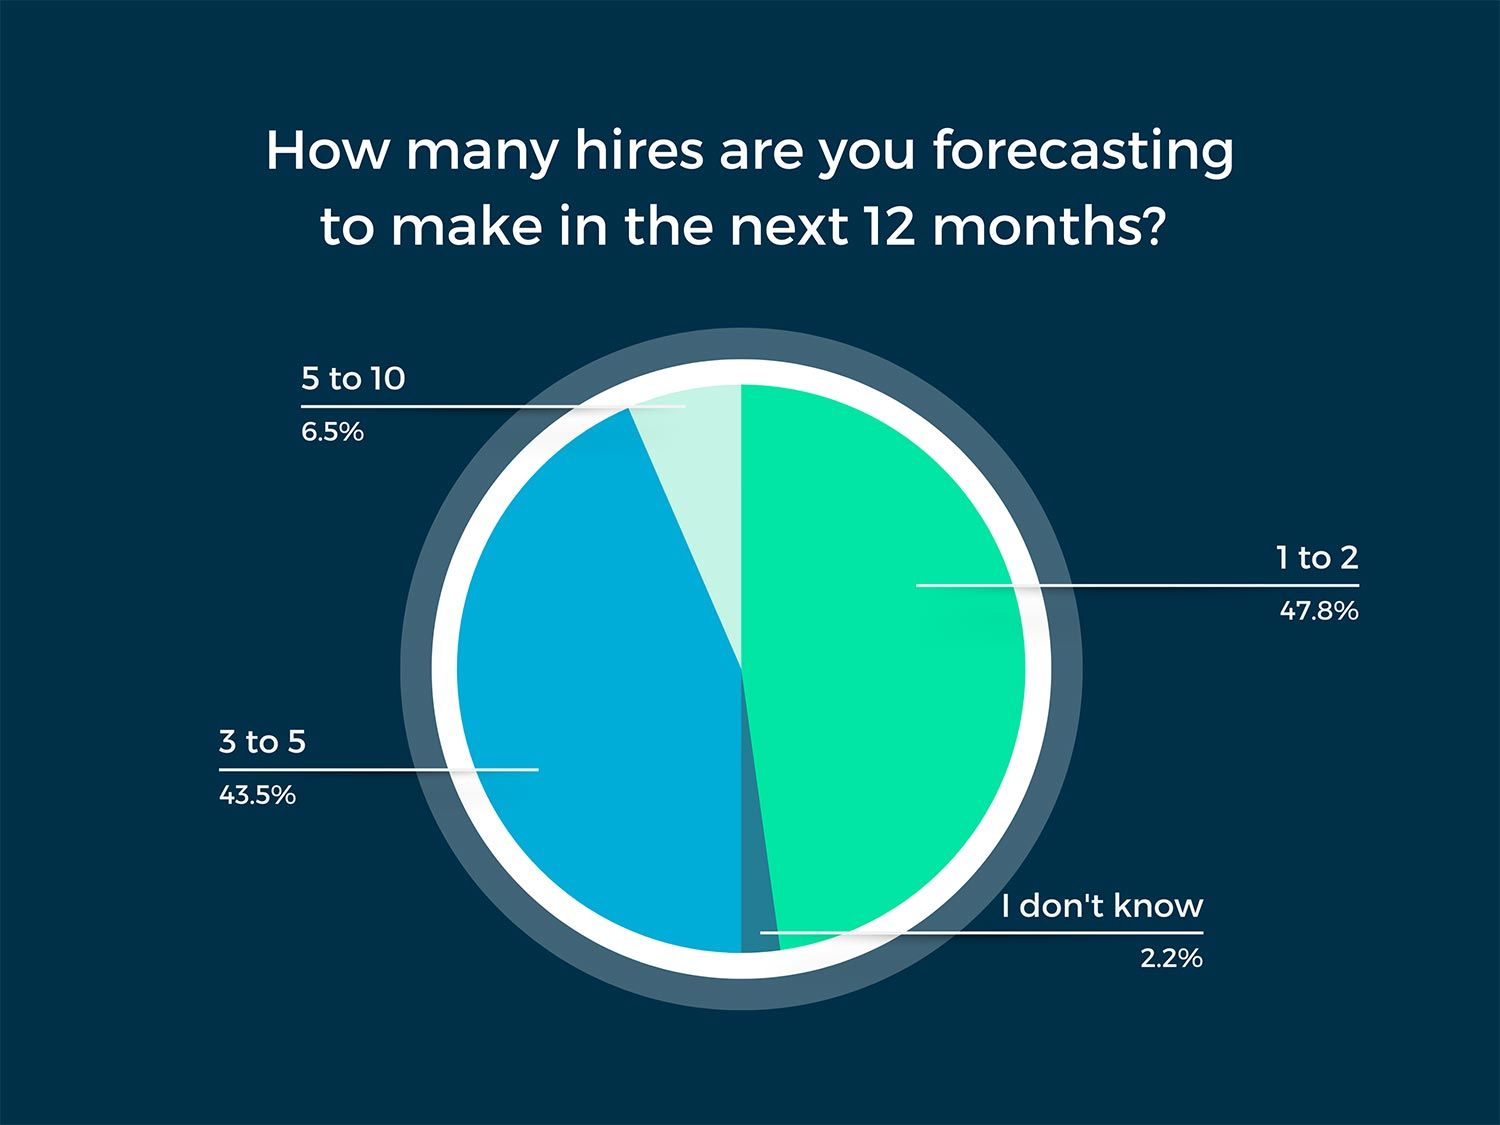 How many hires are you forecasting to make in the next 12 months? 